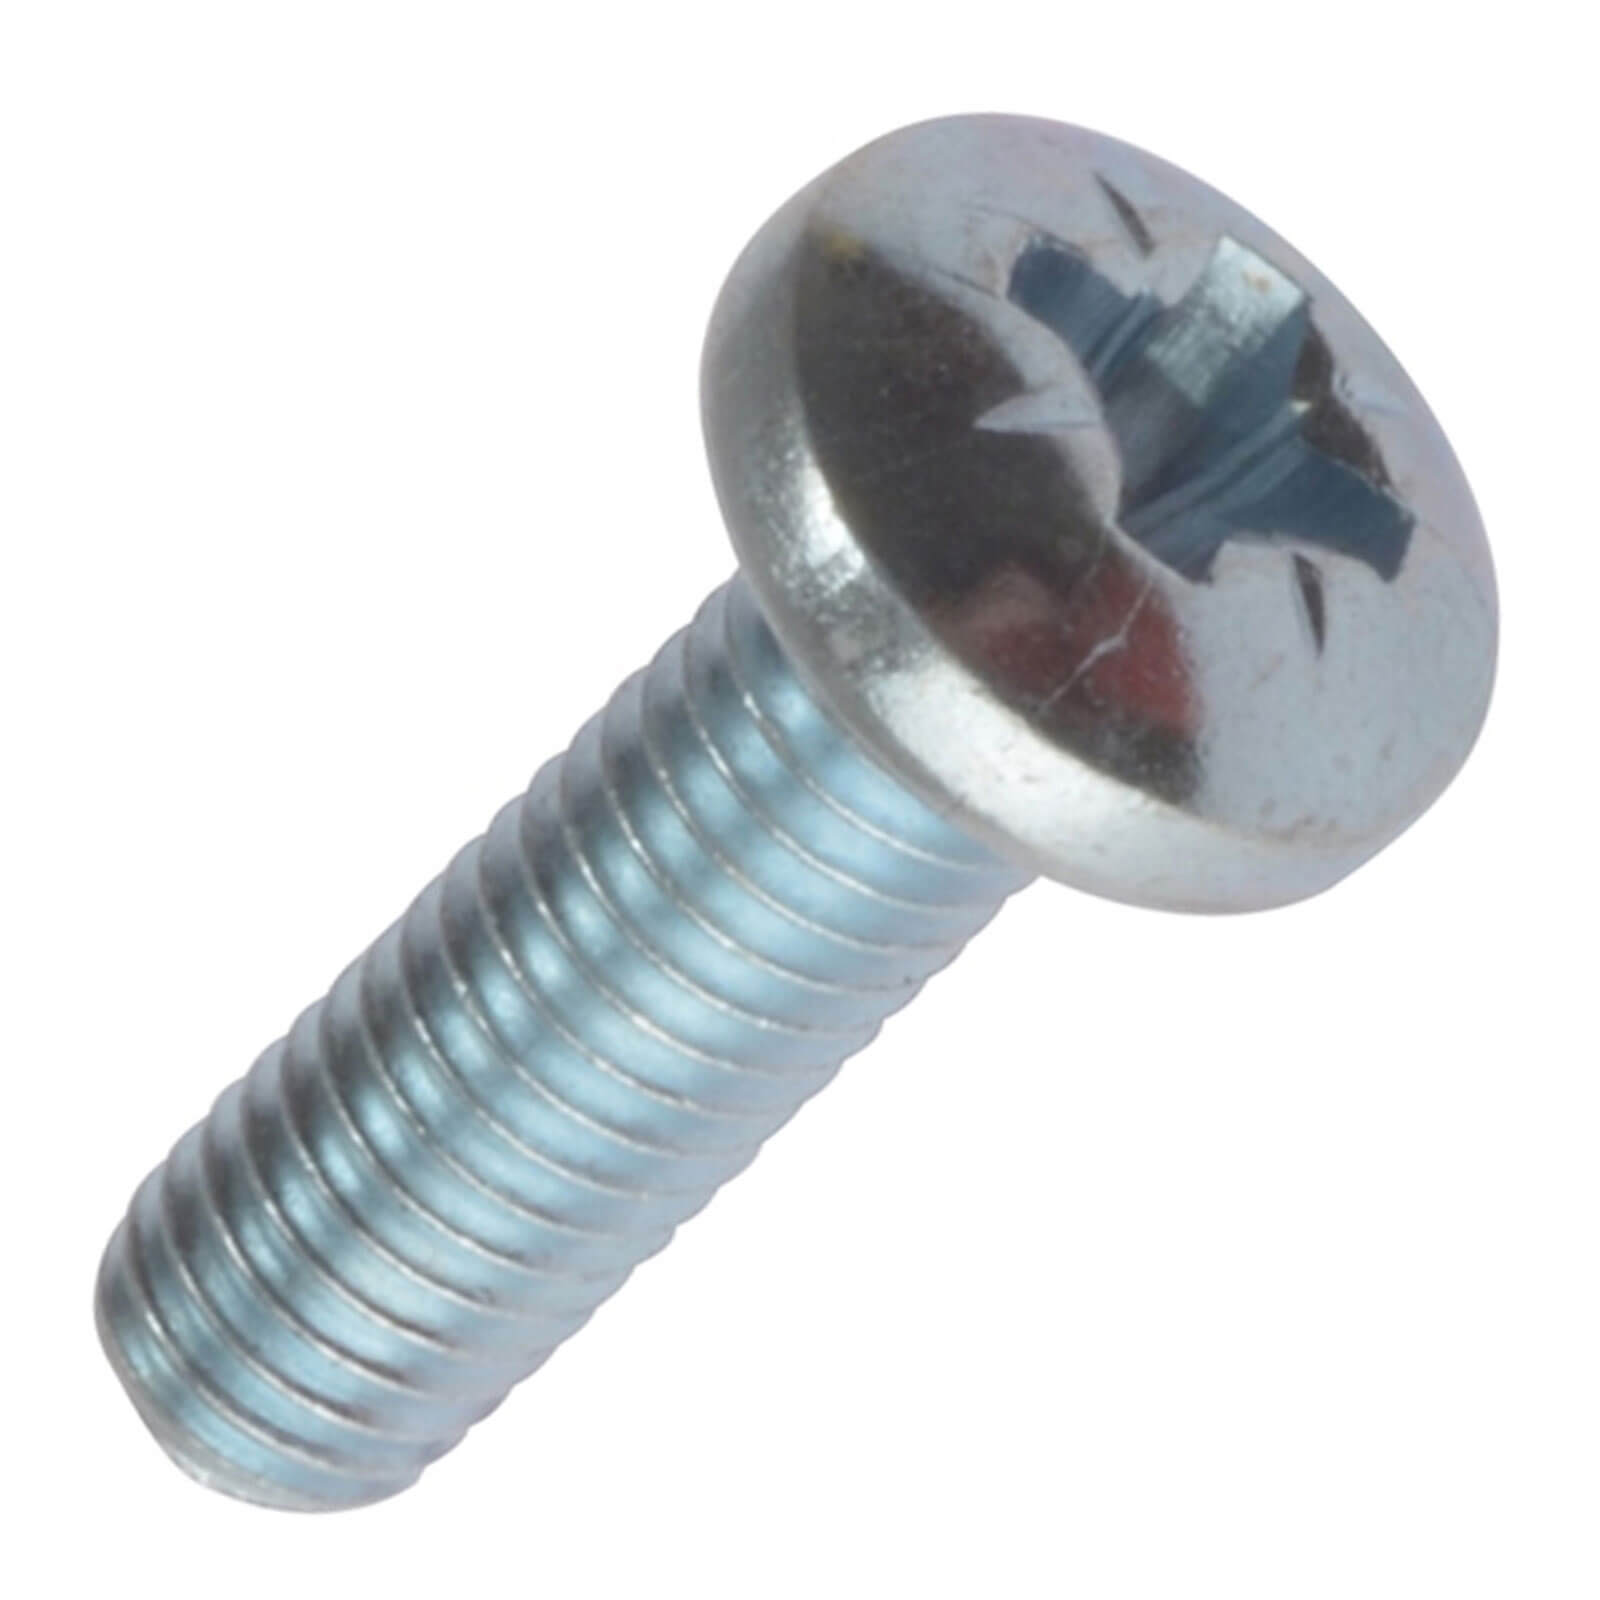 Photos - Nail / Screw / Fastener TIMCO Machine Screw Pozi Pan Head Bright Zinc Plated M5 16mm Pack of 100 5016PPM 